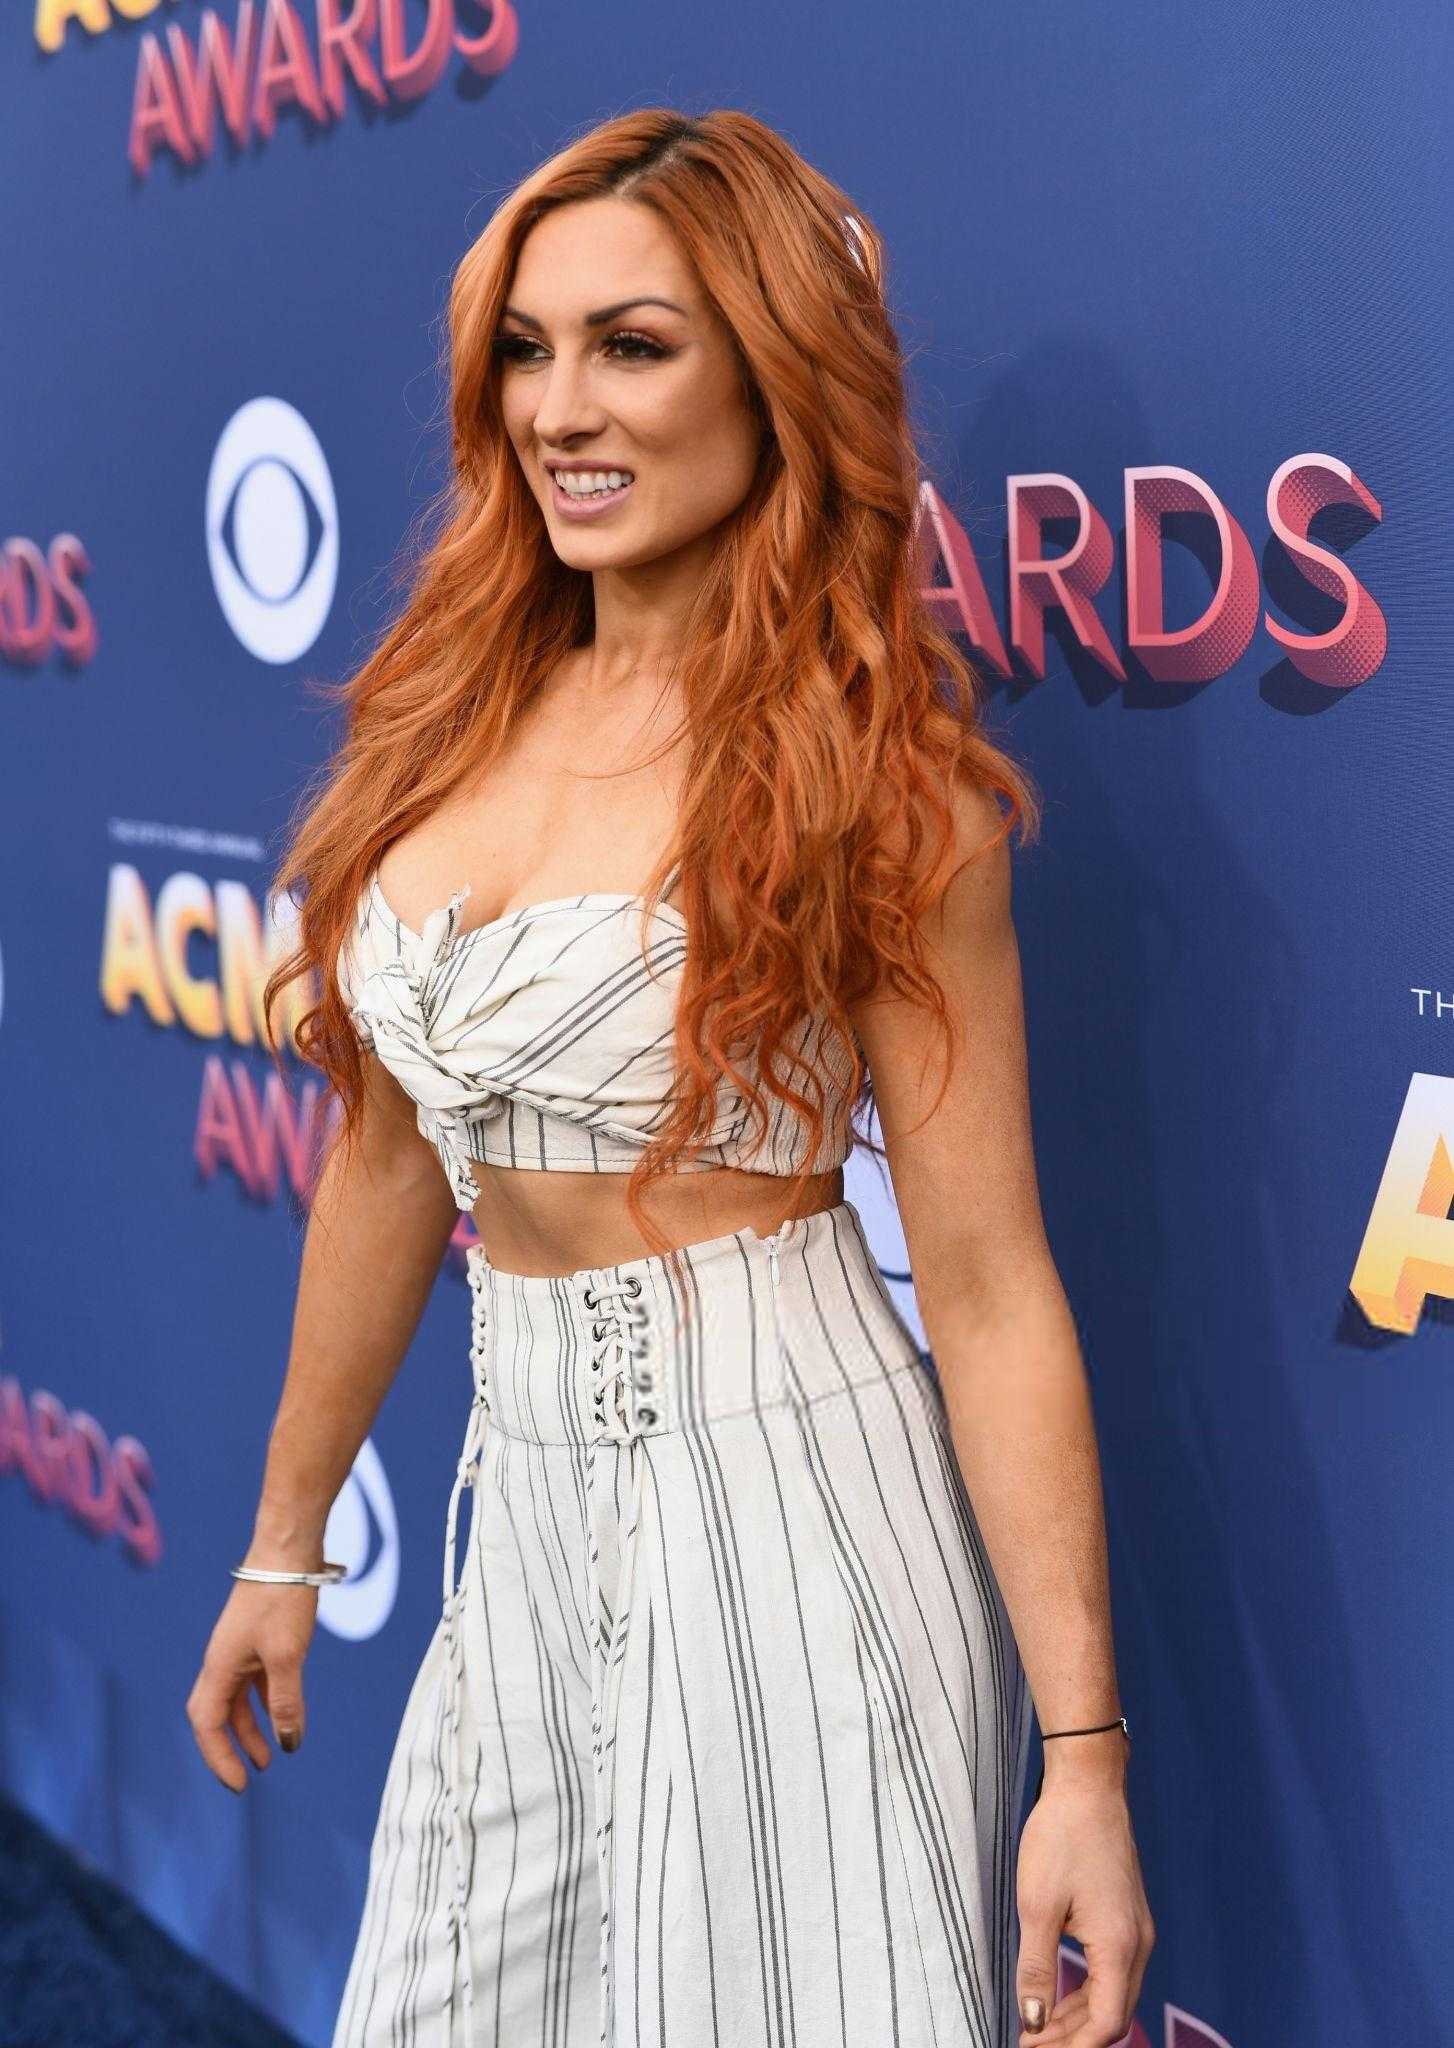 70+ Hot And Sexy Pictures of Becky Lynch – WWE Diva Will Sizzle You Up 27